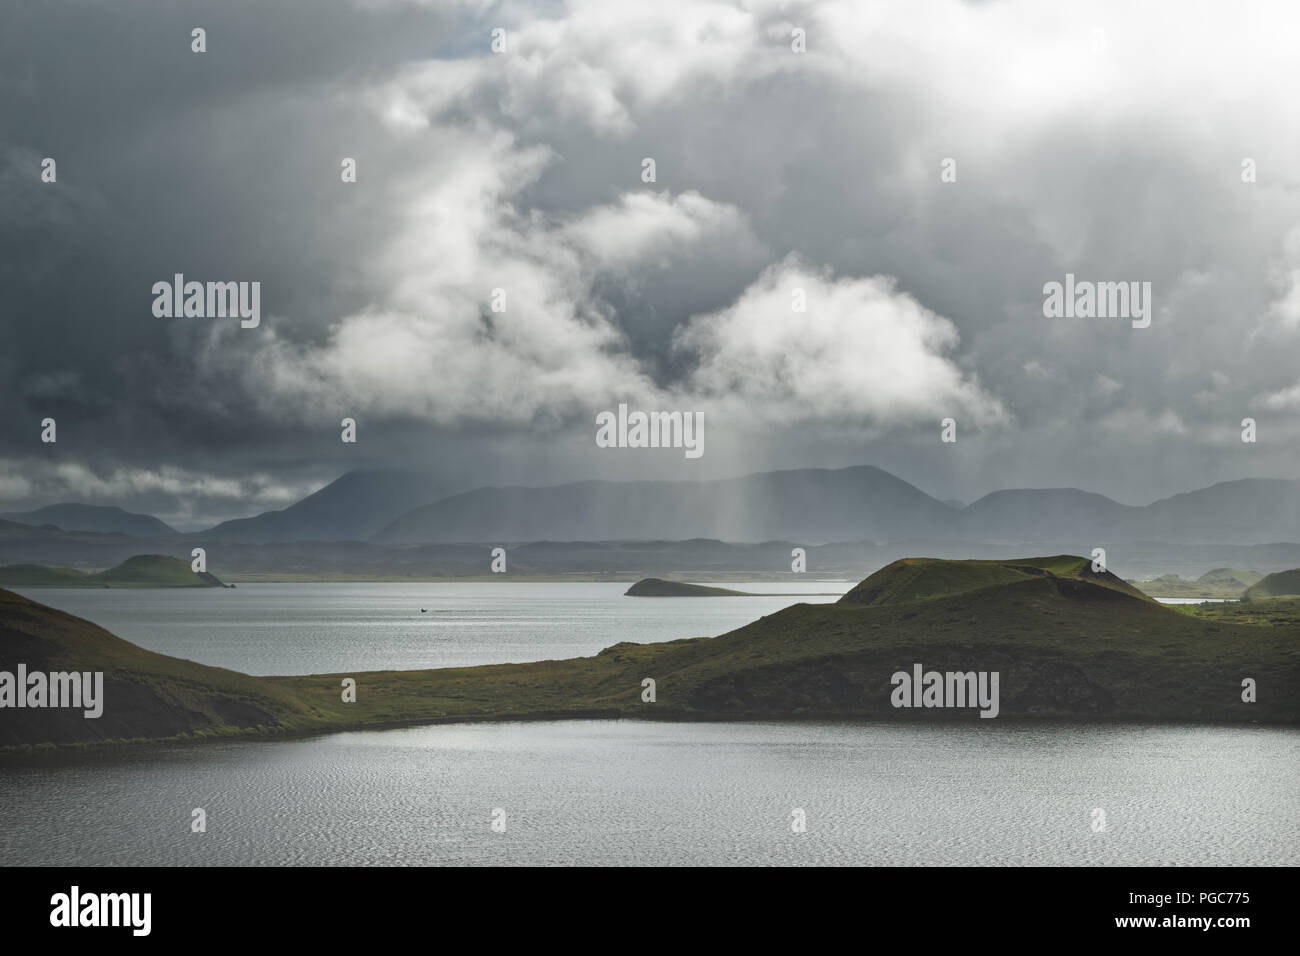 Large lake with islands, framed by mountains, individual areas are illuminated by the sun, in the background gray clouds and rain veils - Location: Ic Stock Photo